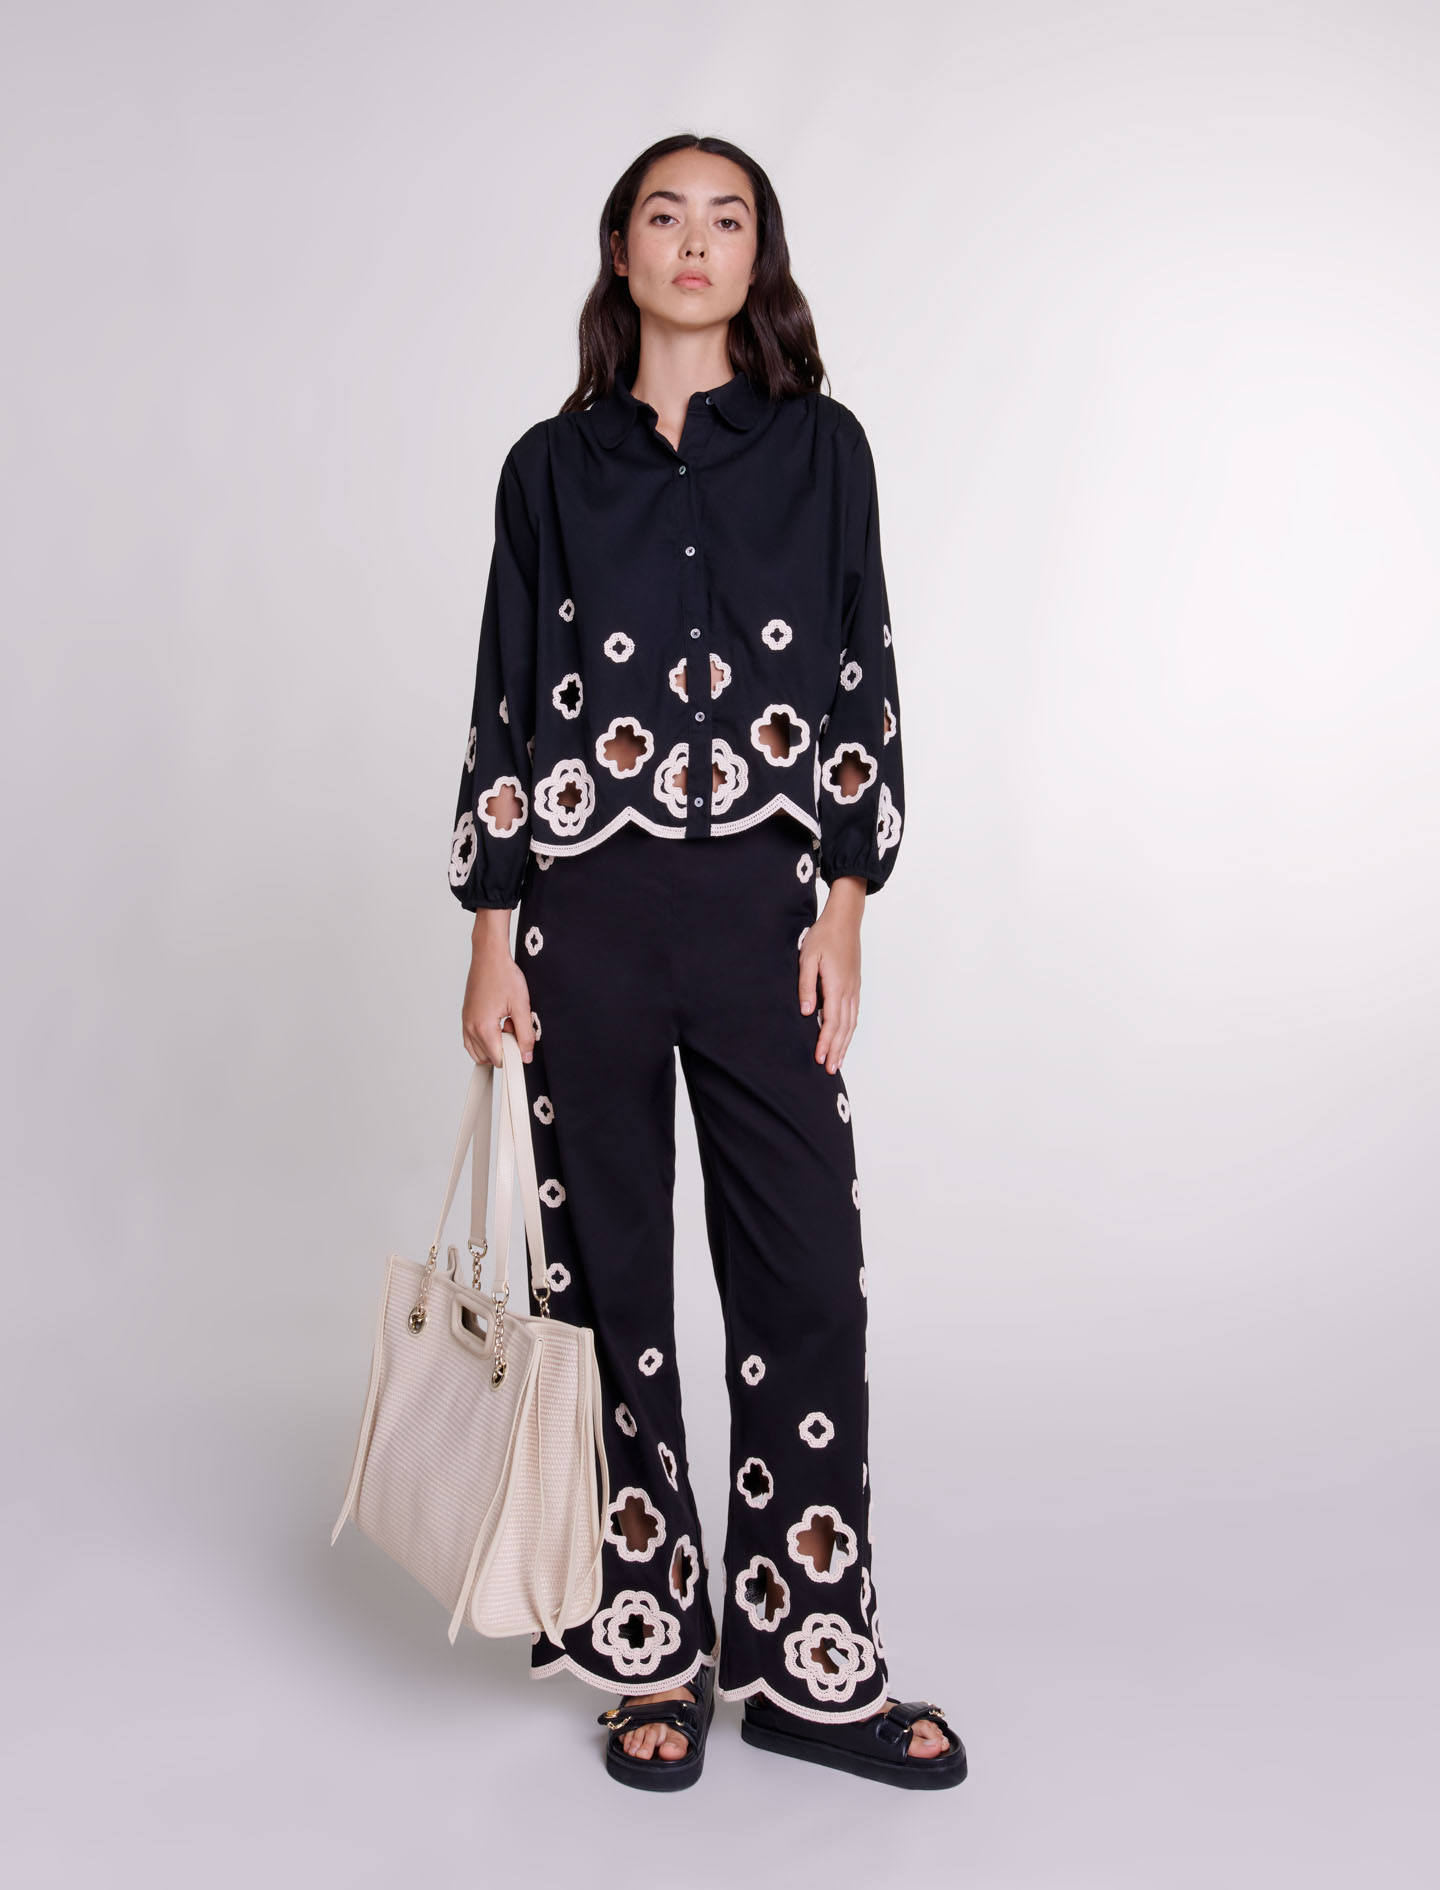 Maje Woman's cotton Embroidery: Crochet Clovers shirt for Spring/Summer, in color Black / Black